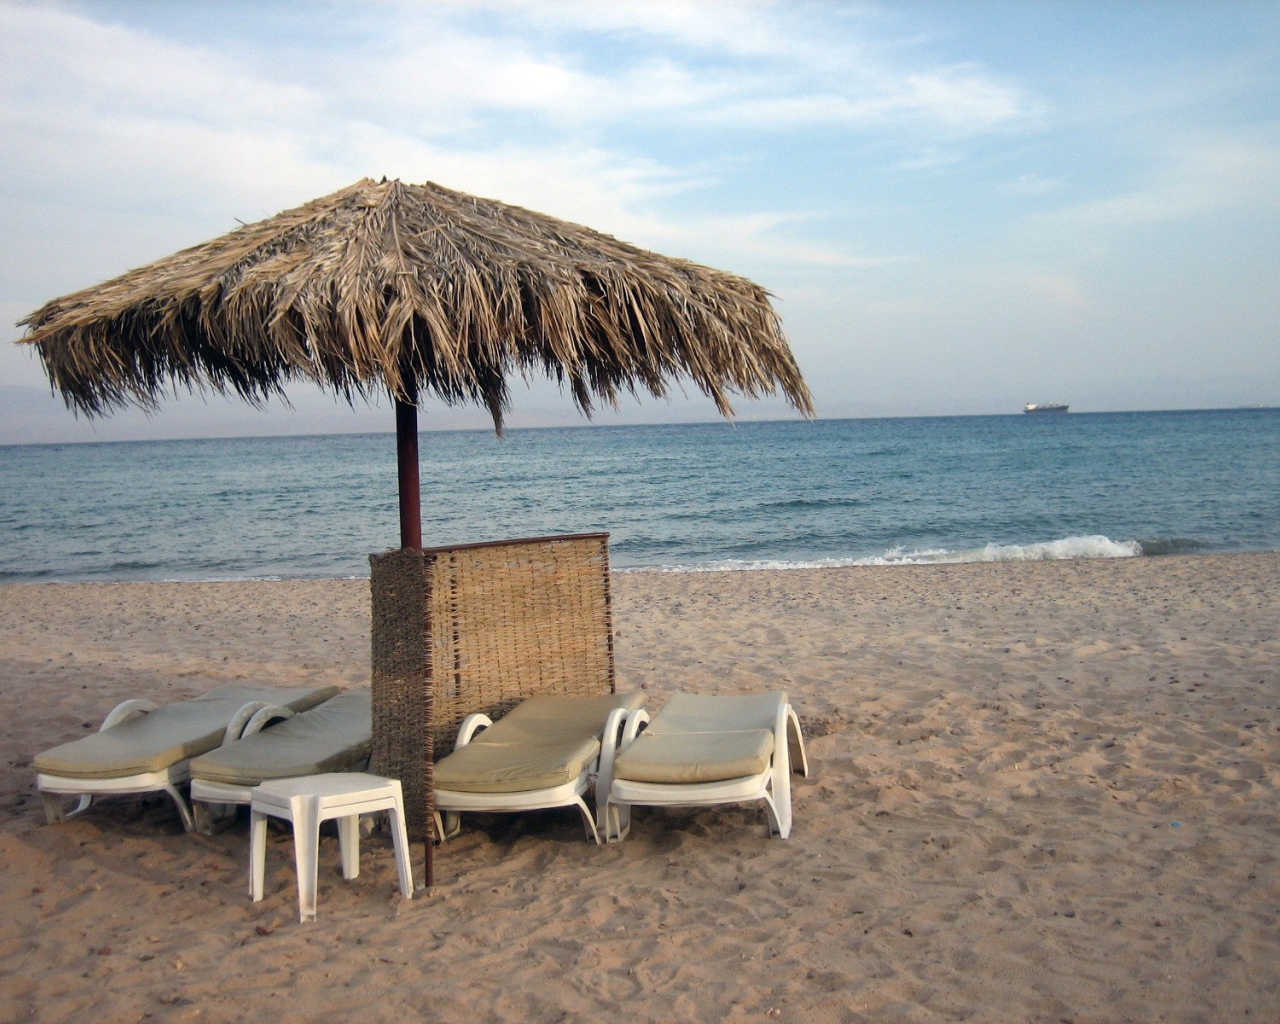 The beach at the resort of Taba, Egypt